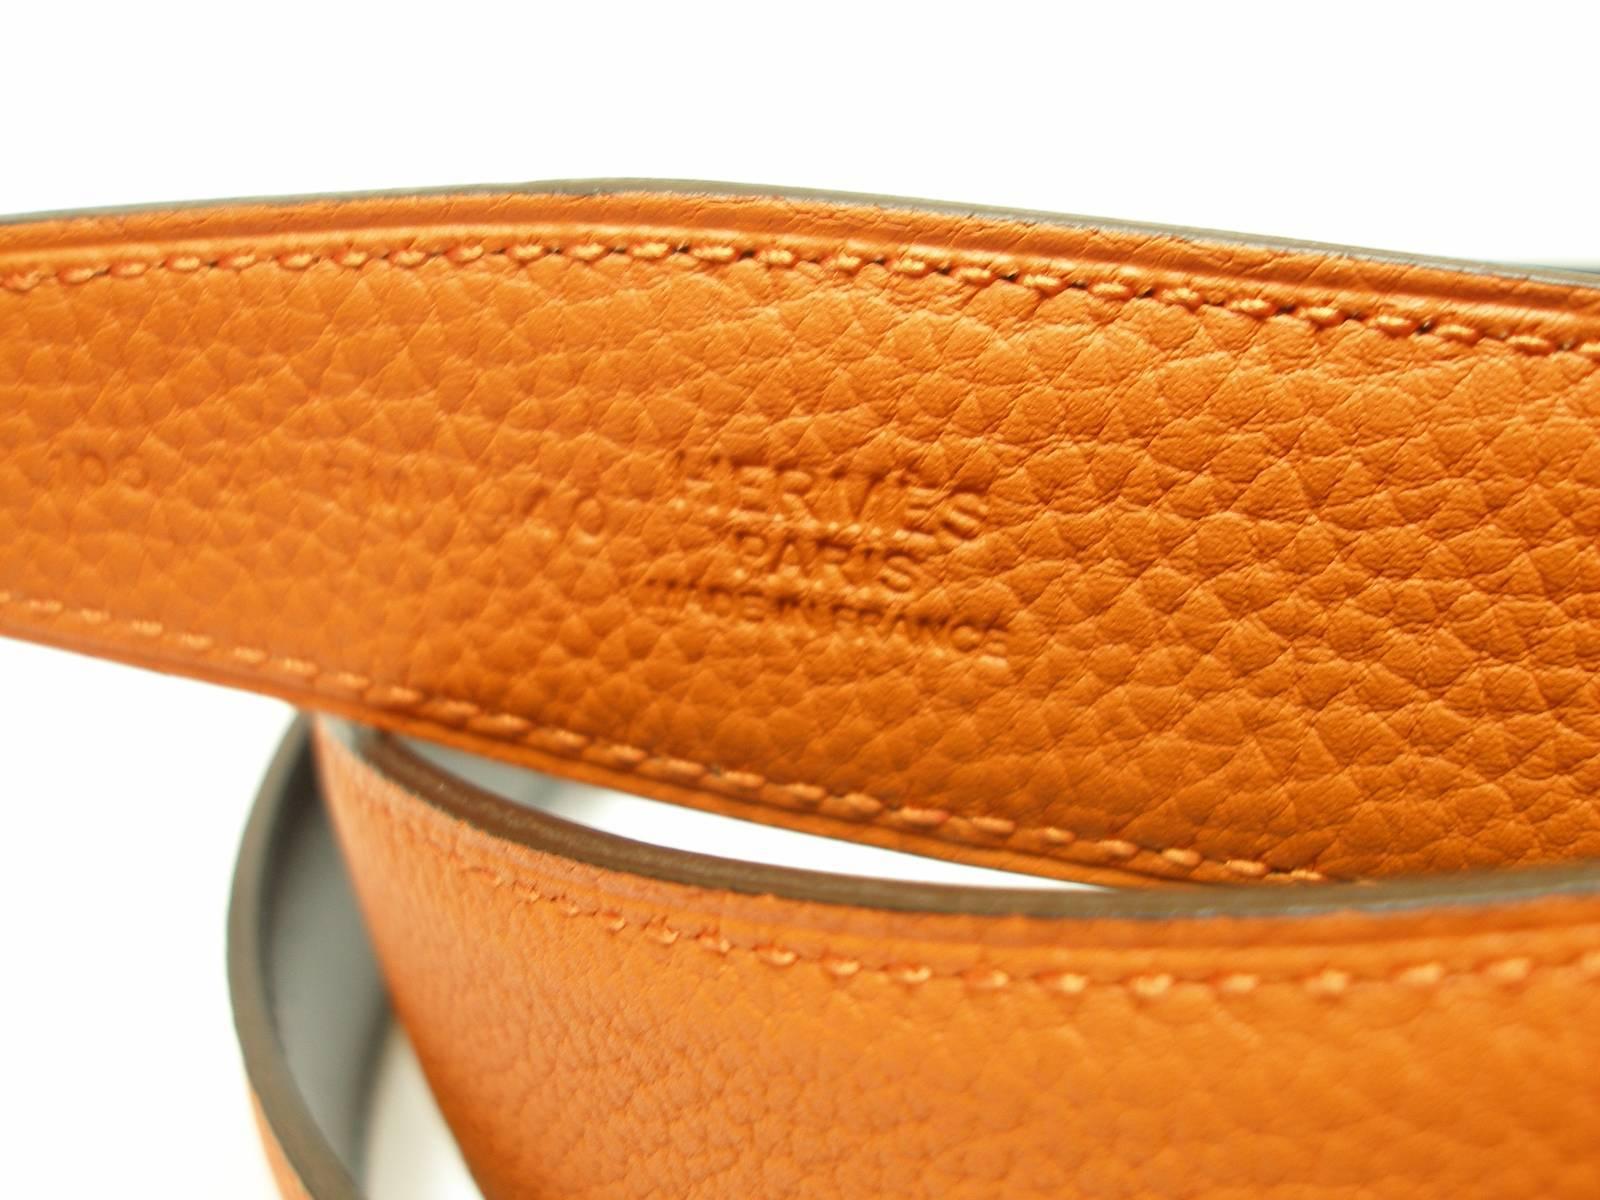 CLASSIQUE and INTEMPOREL 
Hermès 32mm Kilt Belt in classic with Idem Buckle Shiny Palladium + Reversible
Strap in Black Box Leather / Potiron Togo Leather 
Size : 105 cm 
For a waist size of  3 possibilities  :
1 /  102.5 cm or 40.35 " 
2/  105